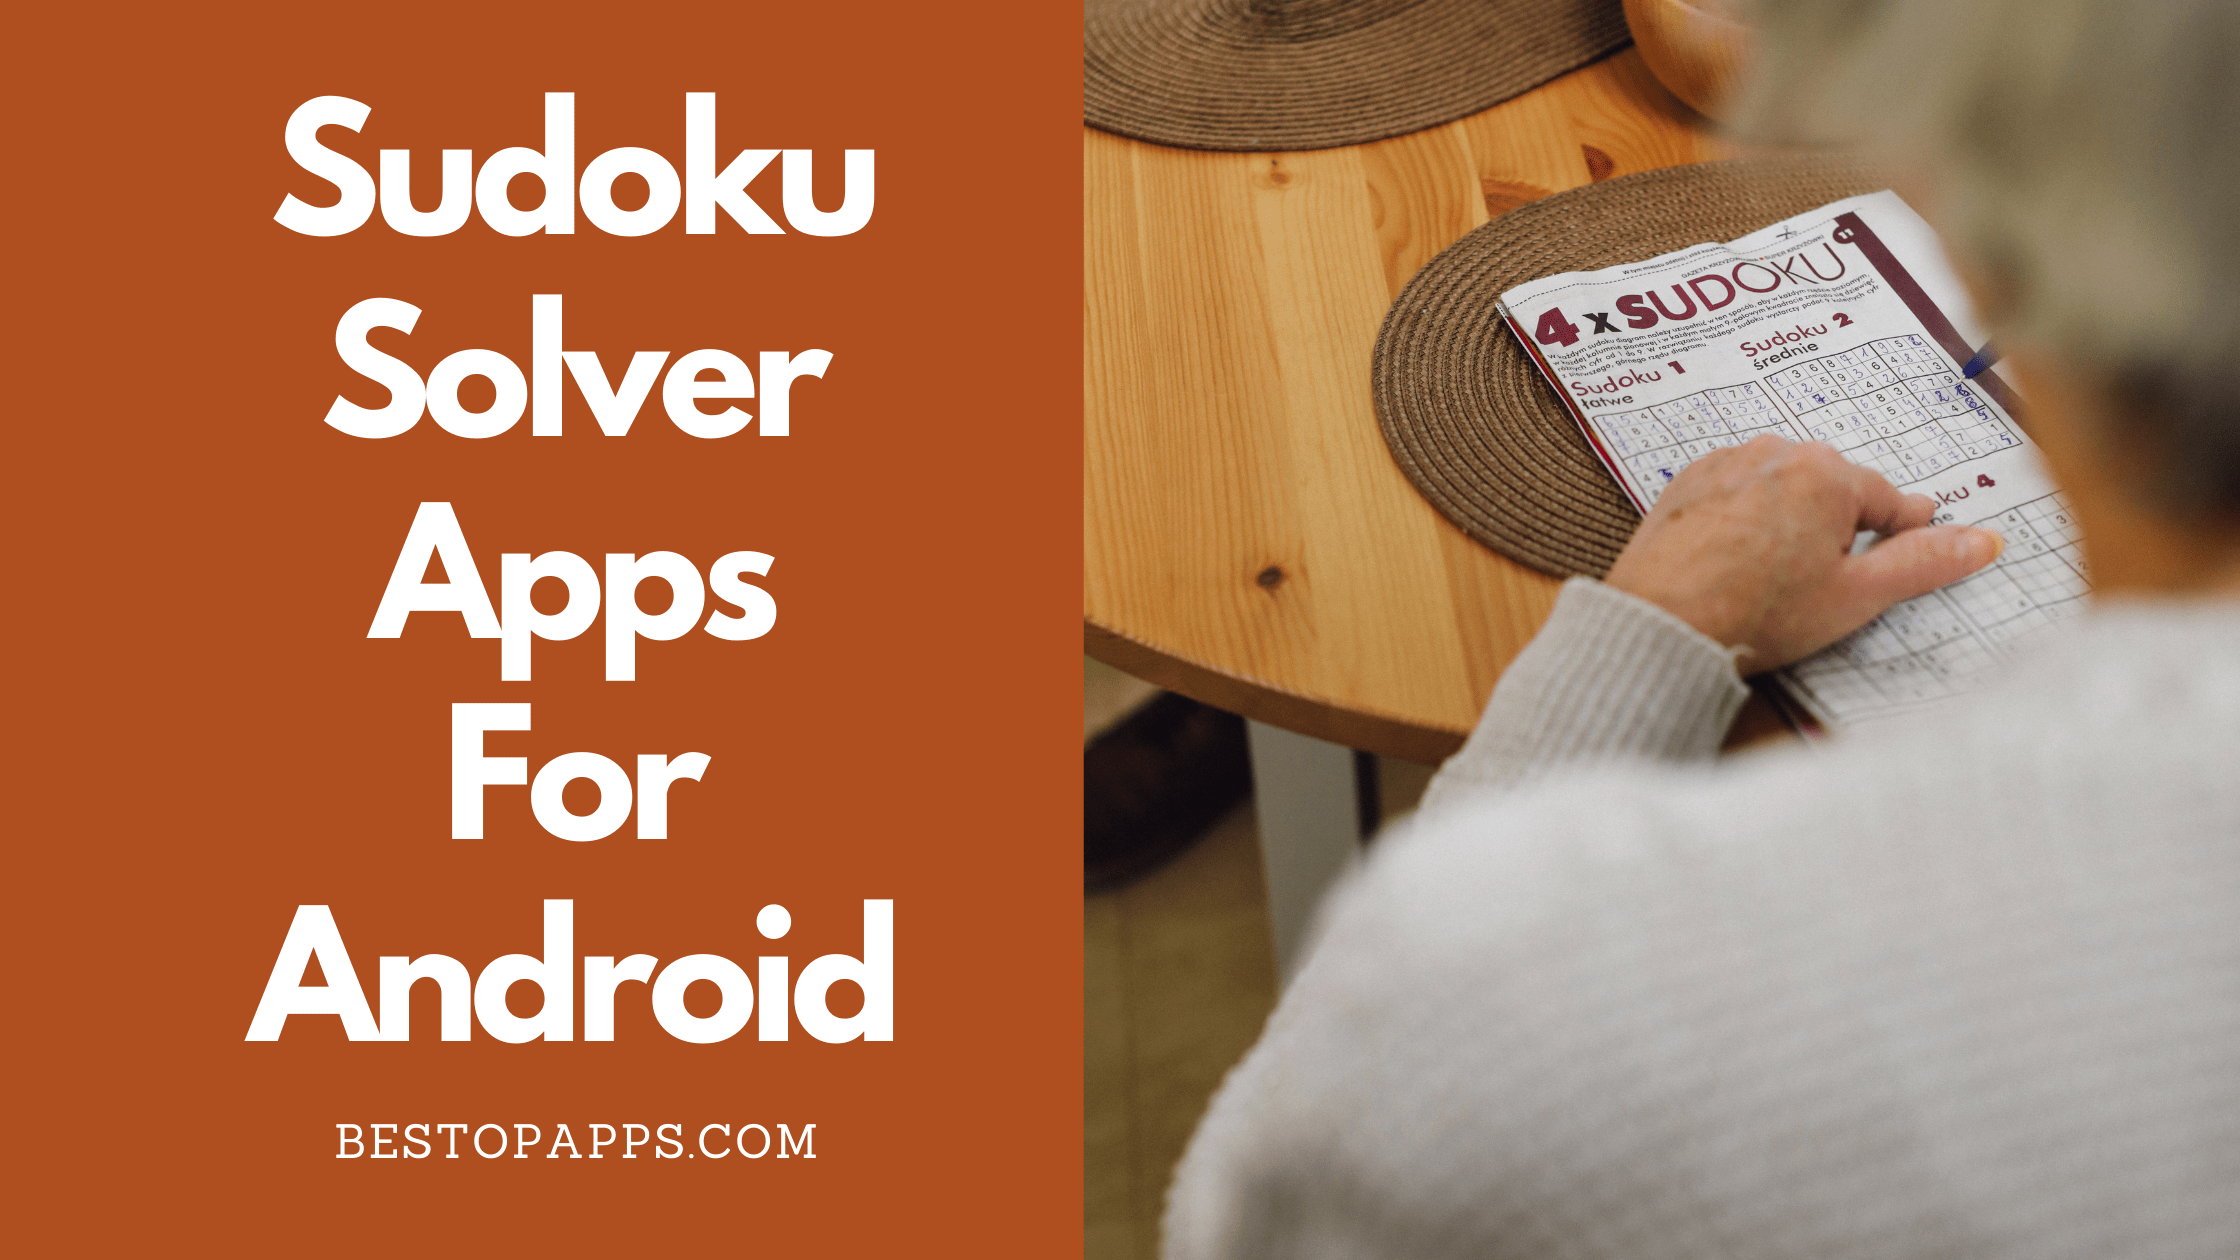 Sudoku Solver Apps For Android